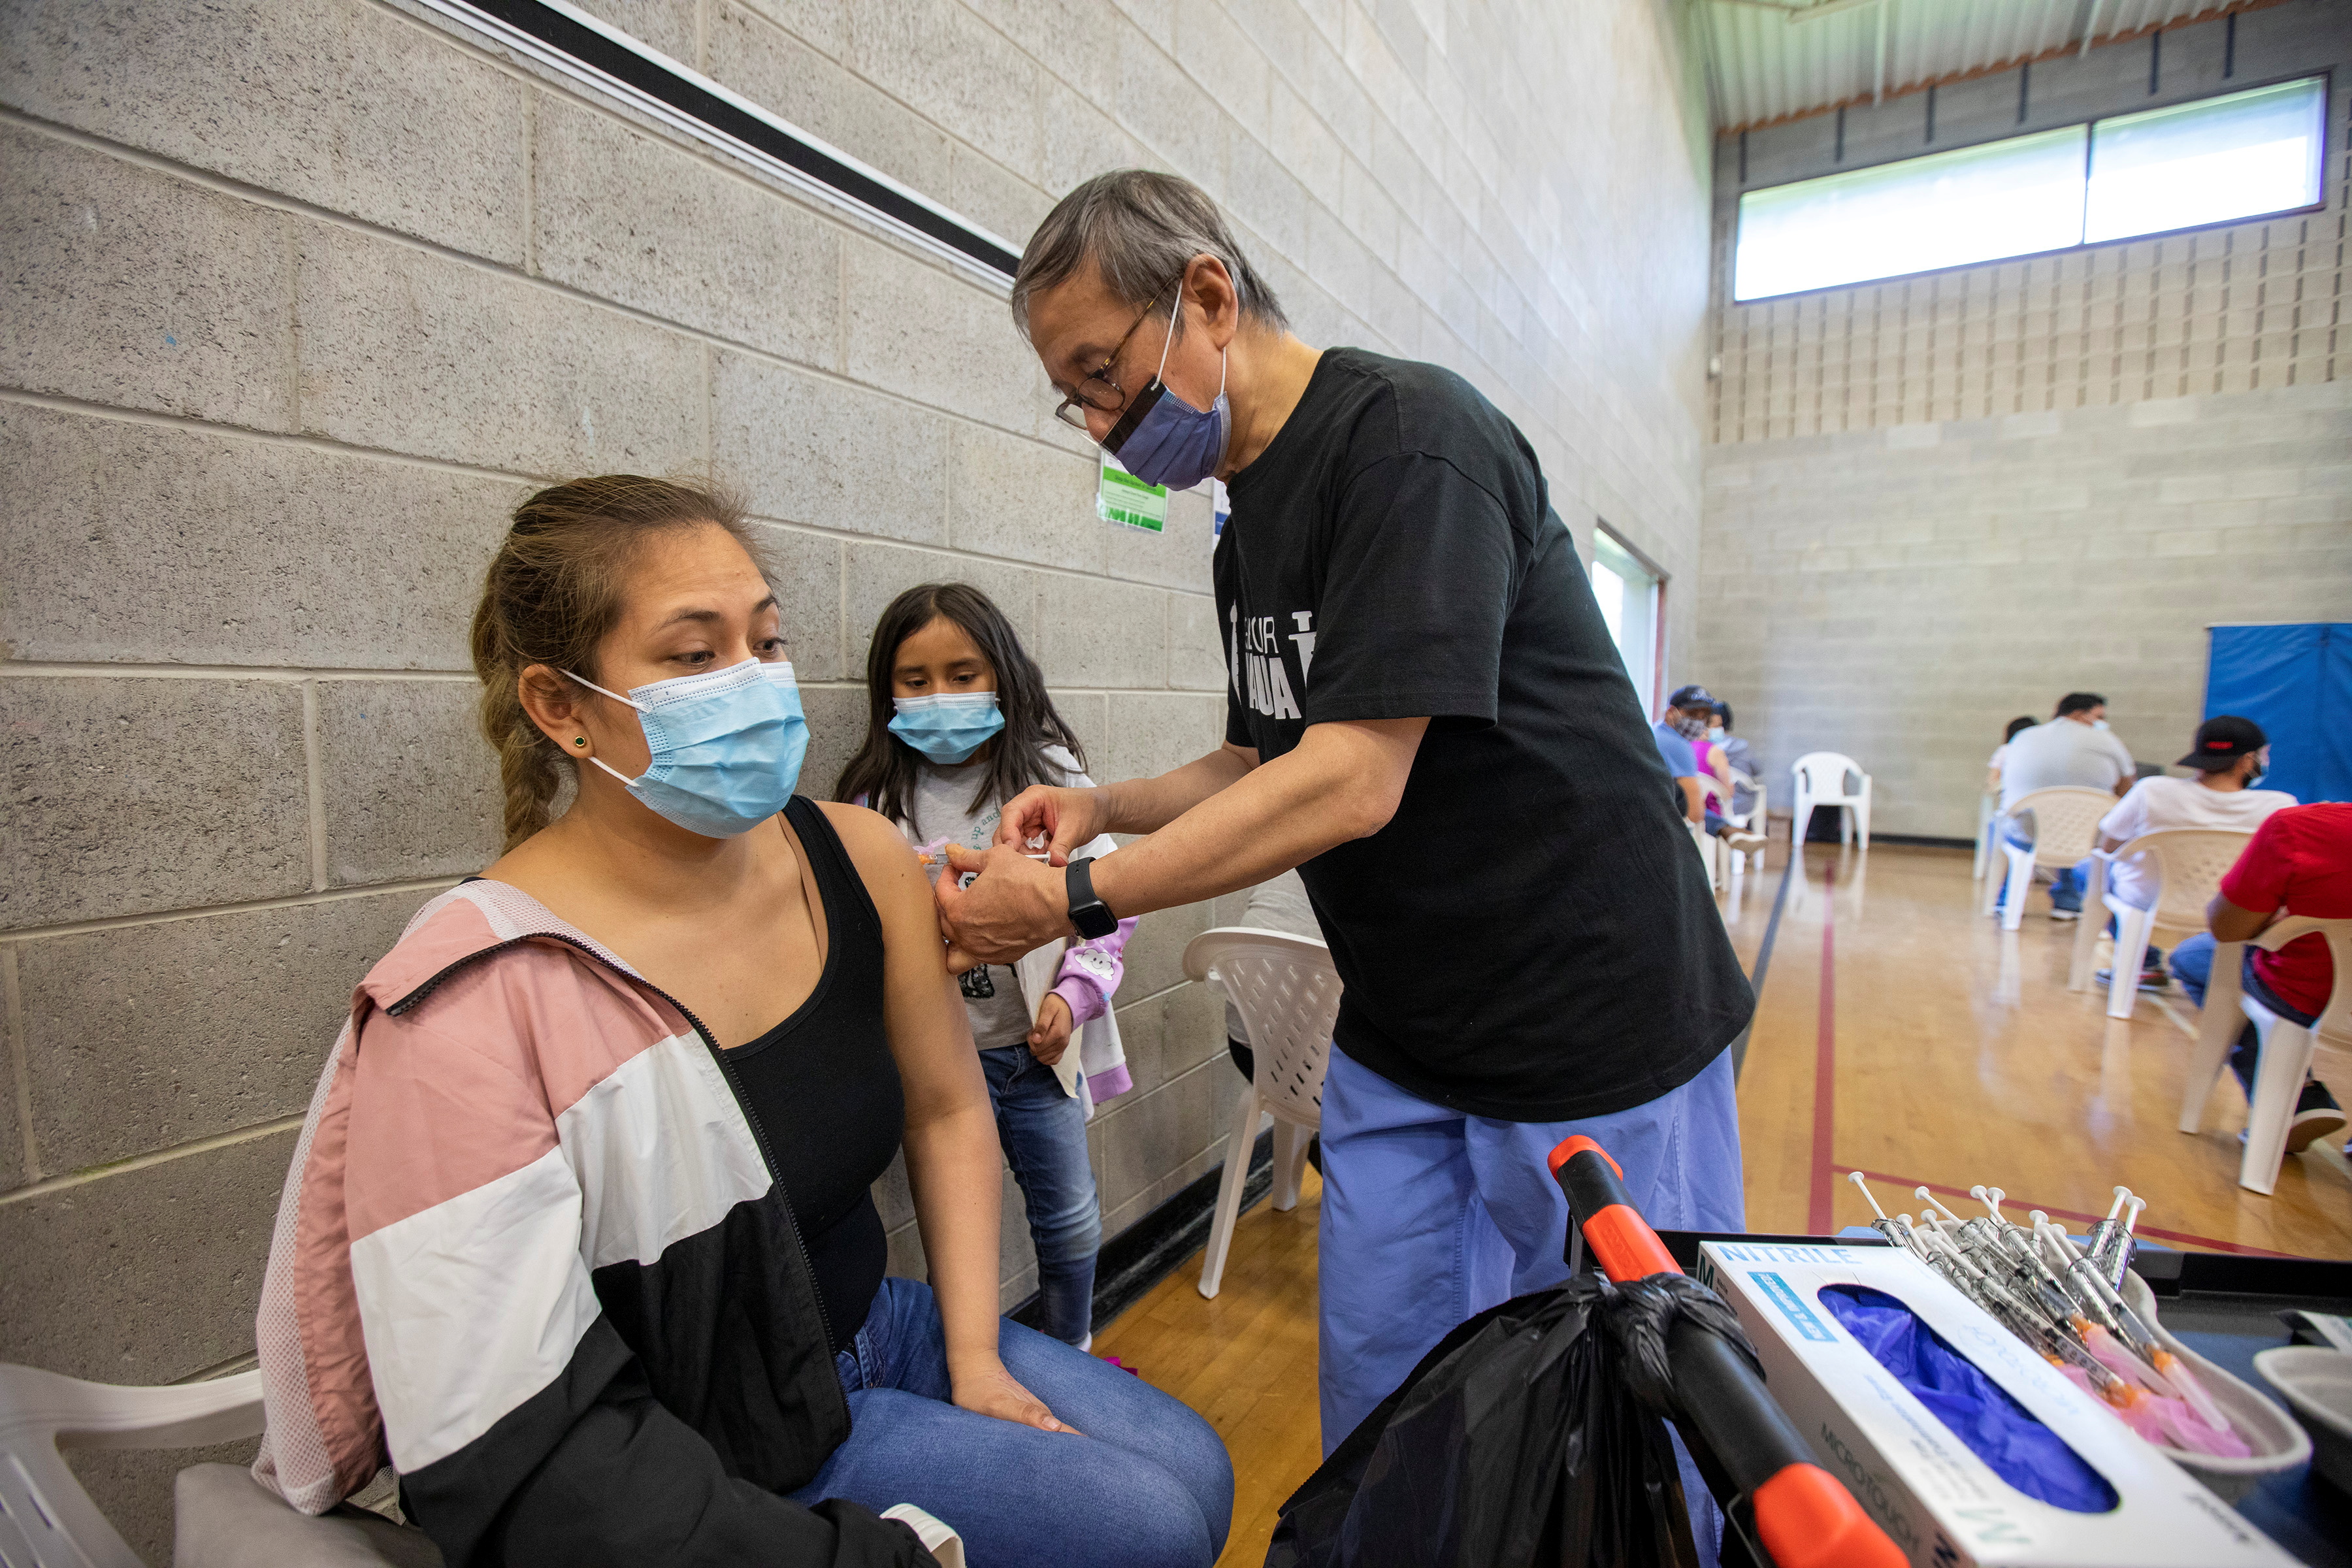 The Latino community organizes a vaccine clinic for their community in Toronto